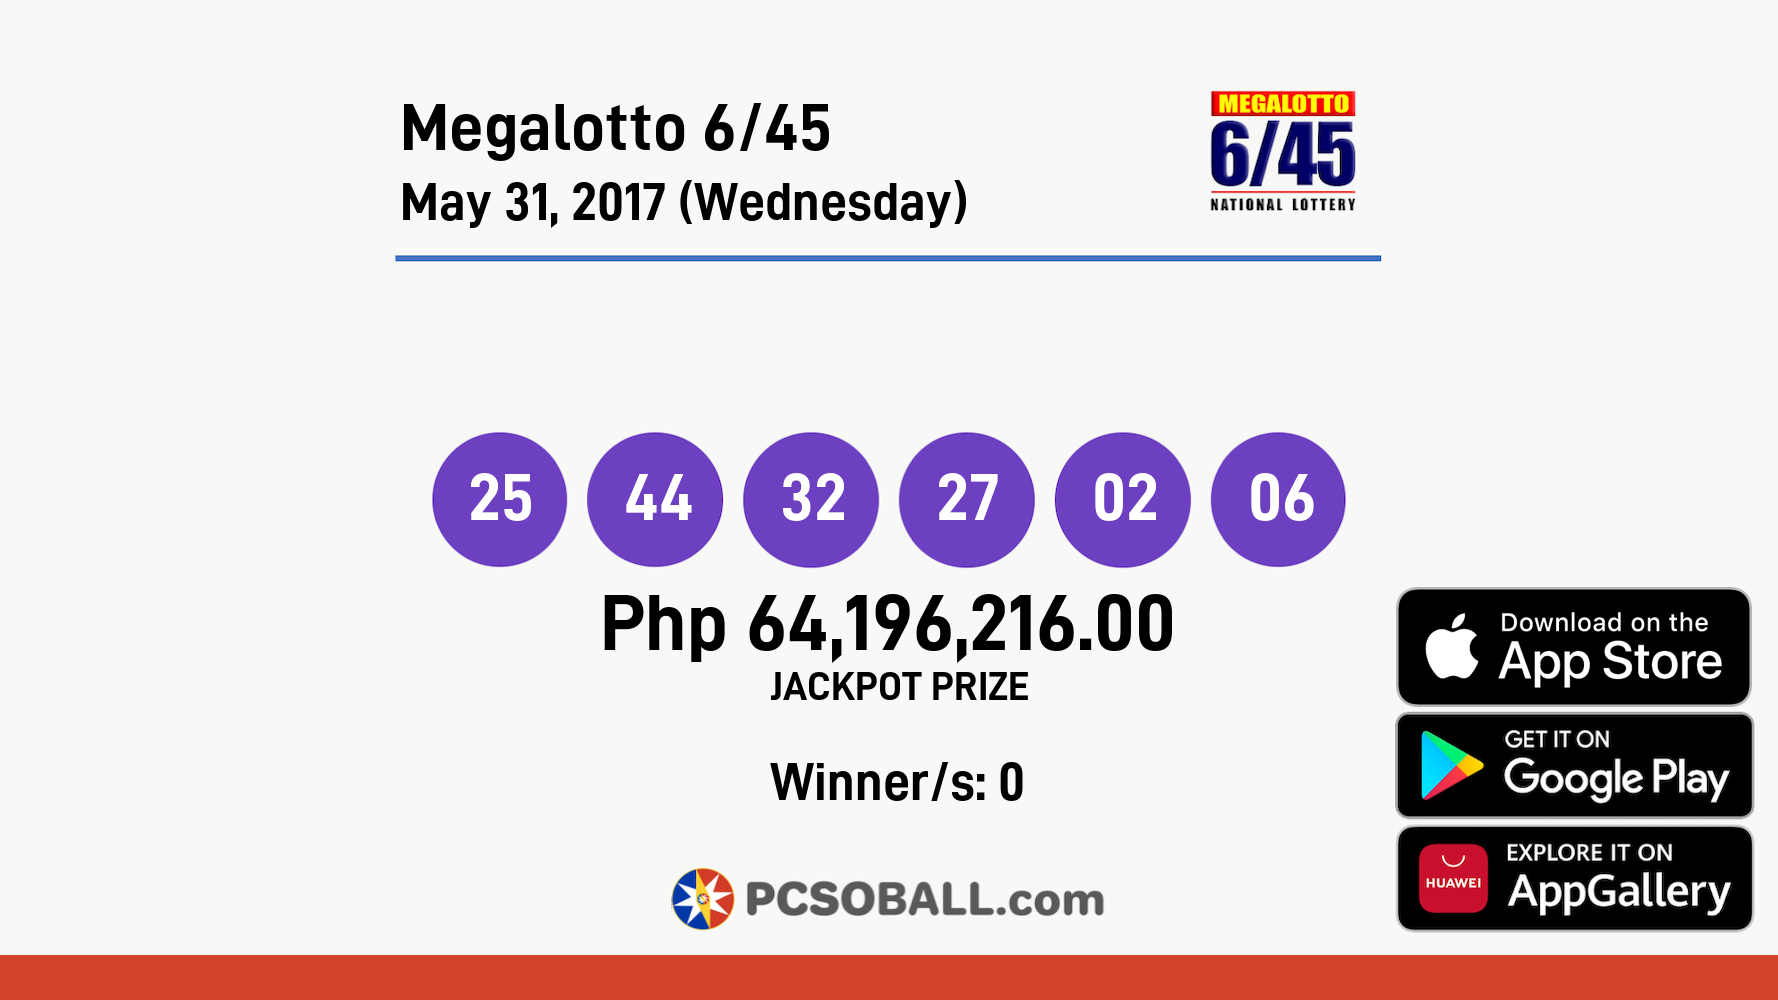 Megalotto 6/45 May 31, 2017 (Wednesday) Result